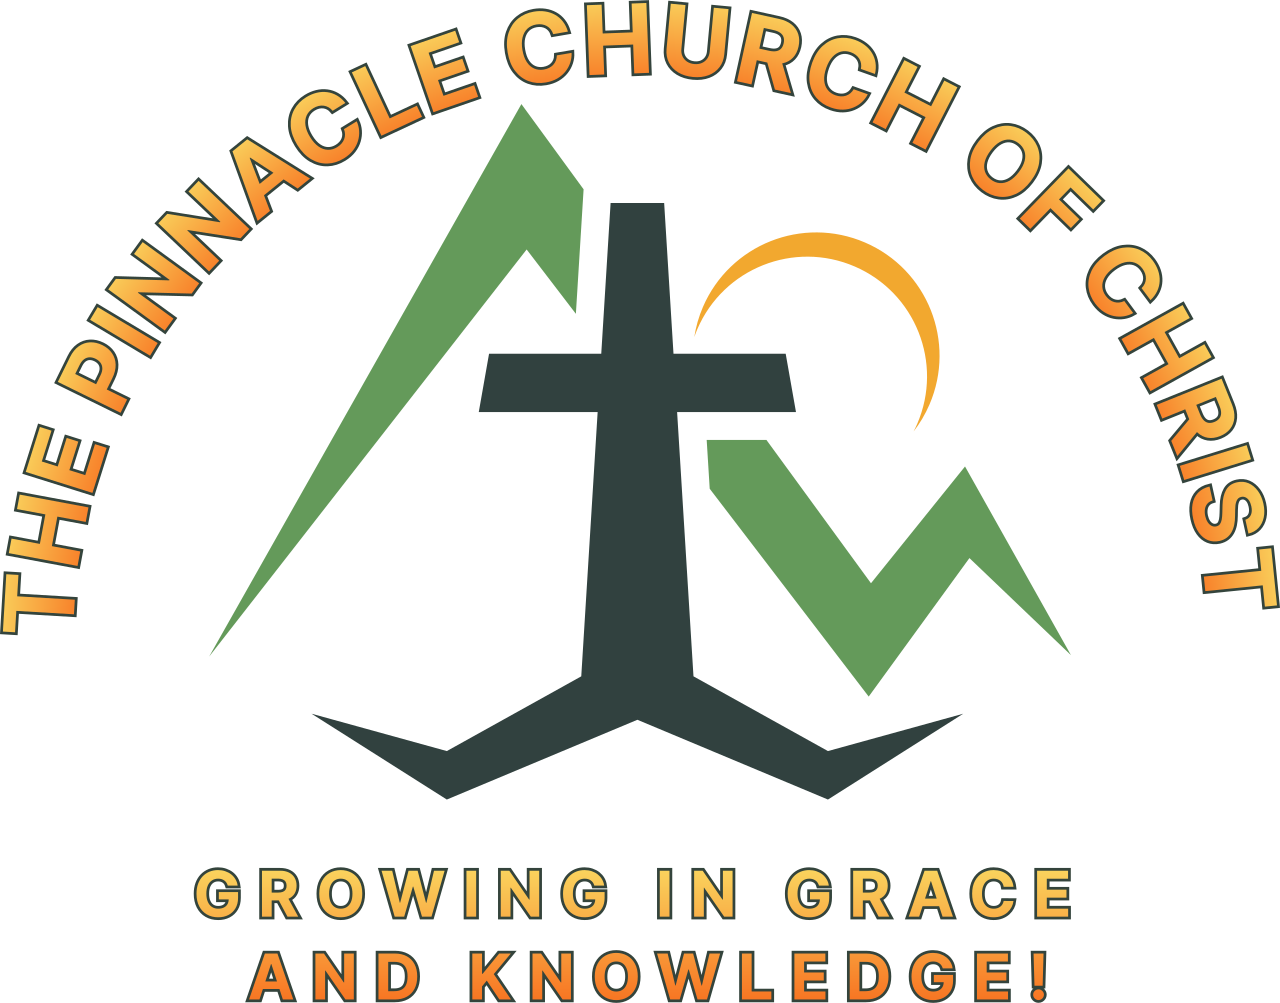 THE PINNACLE CHURCH OF CHRIST 's web page